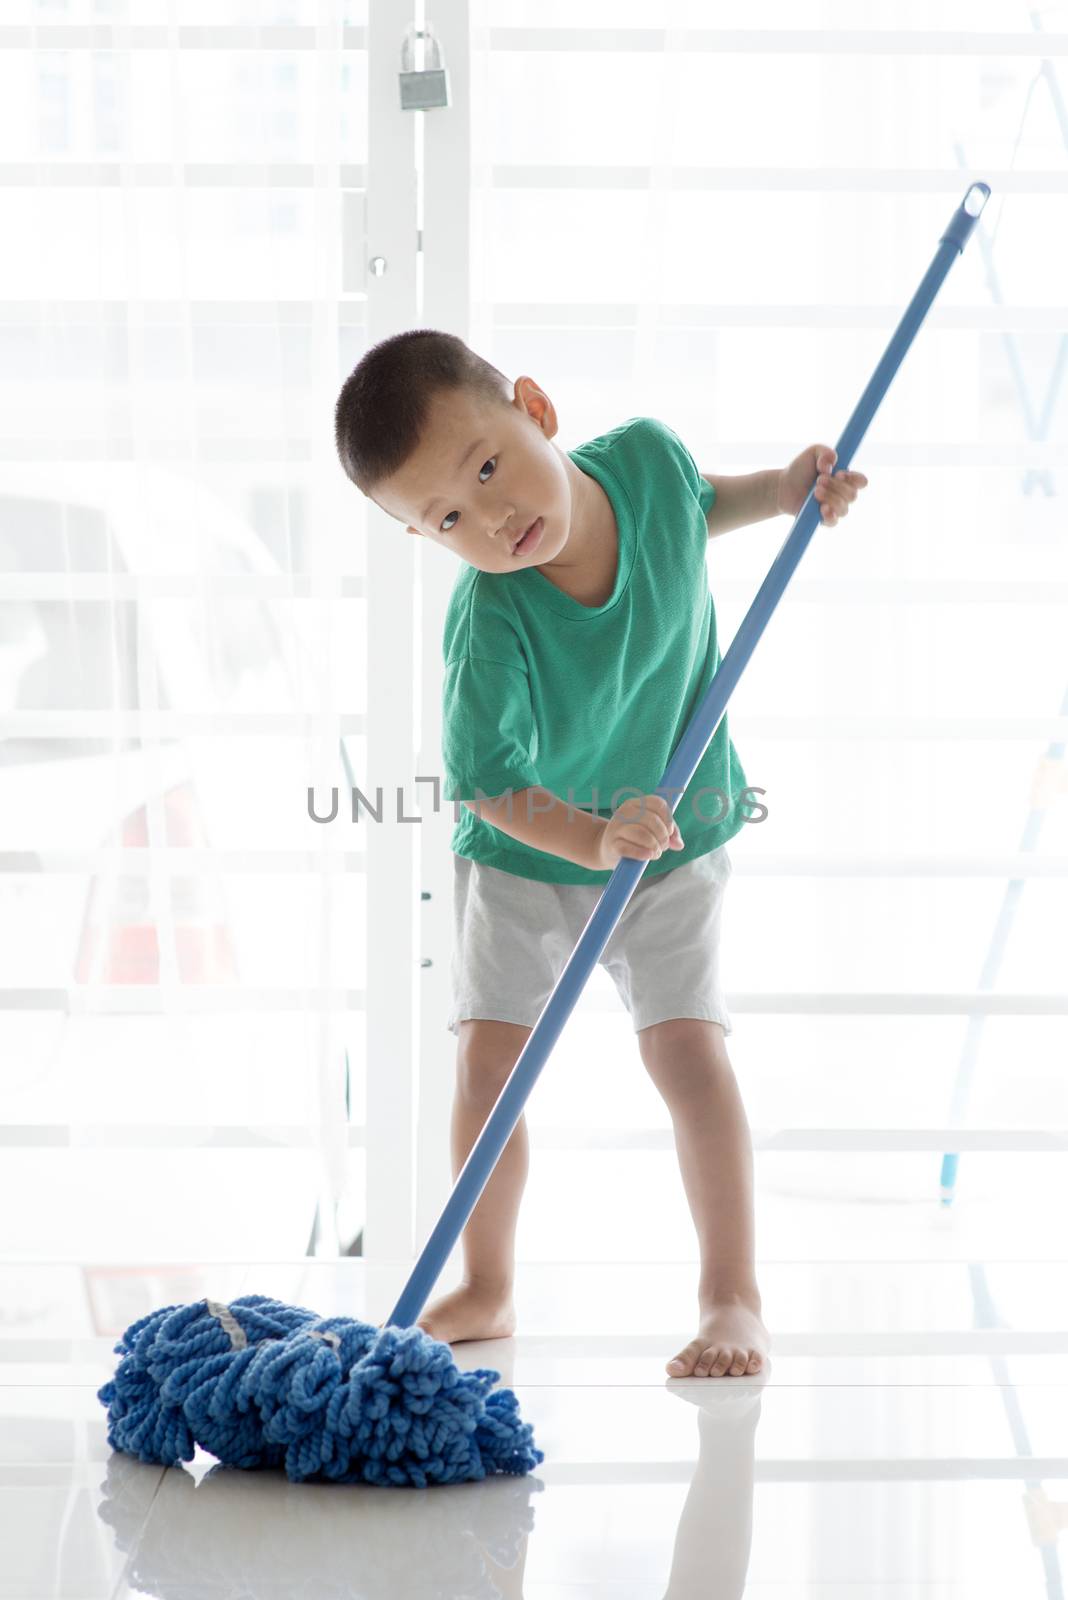 Asian boy cleaning floor with mop. Young child doing house chores at home.